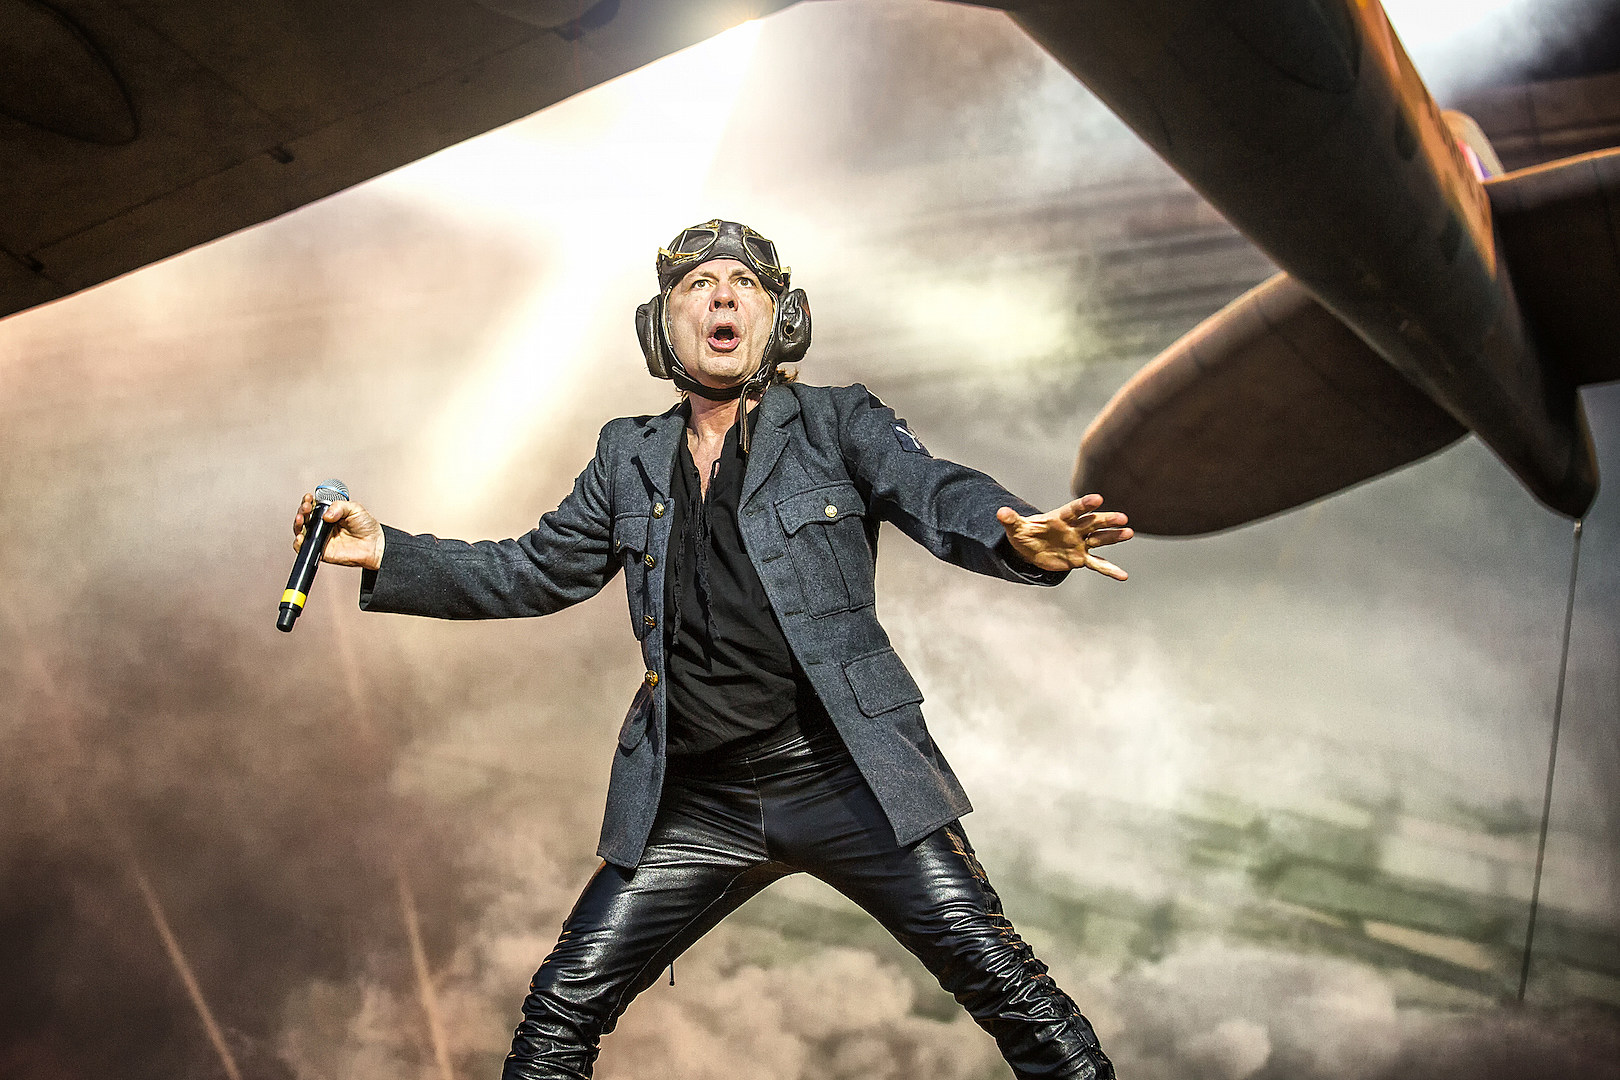 Iron Maiden’s Bruce Dickinson Could Be Your Pilot This Summer